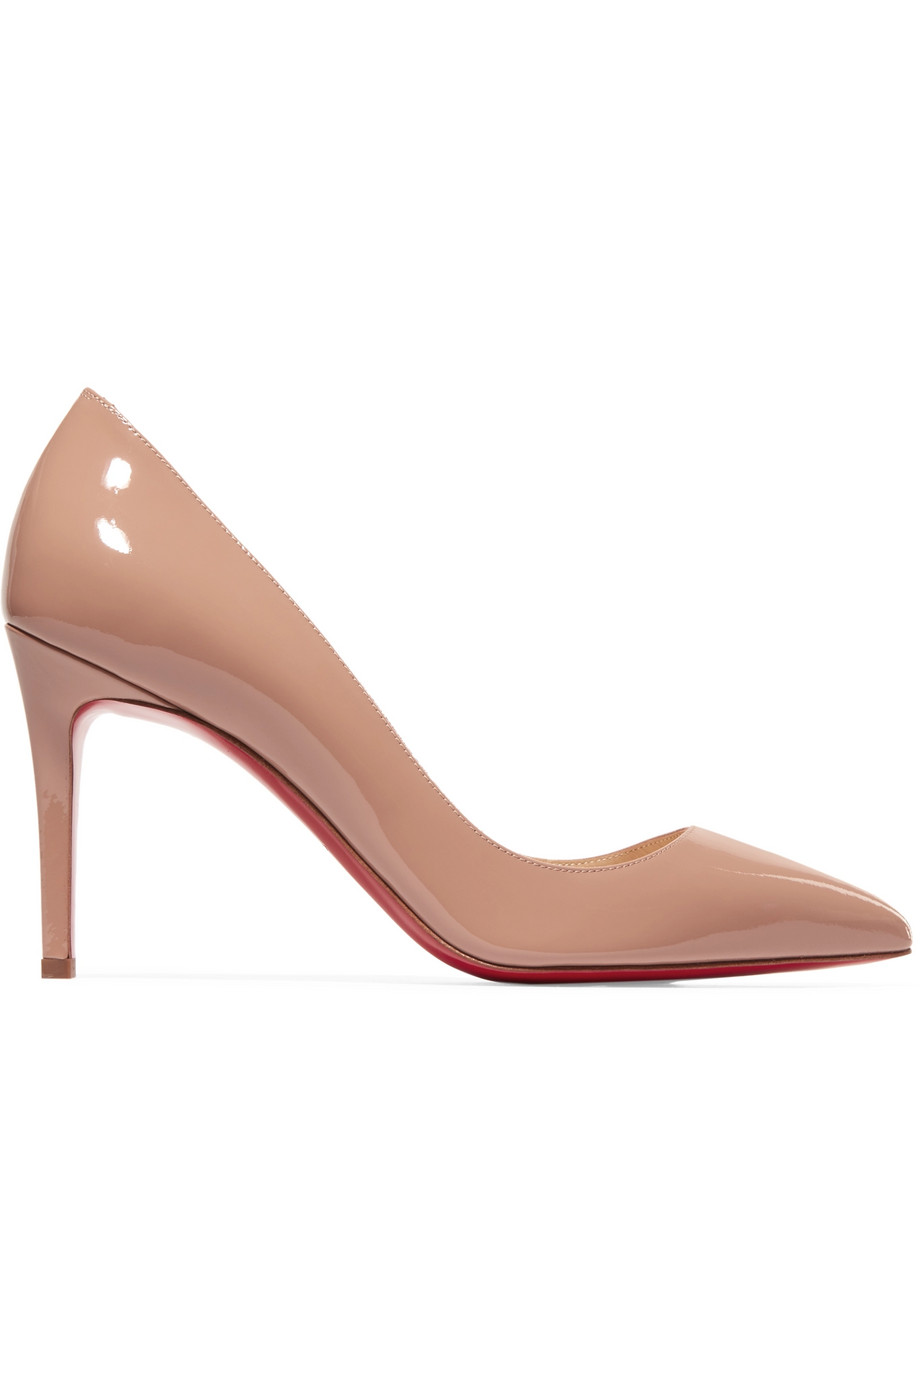 christian louboutin pigalle follies nude